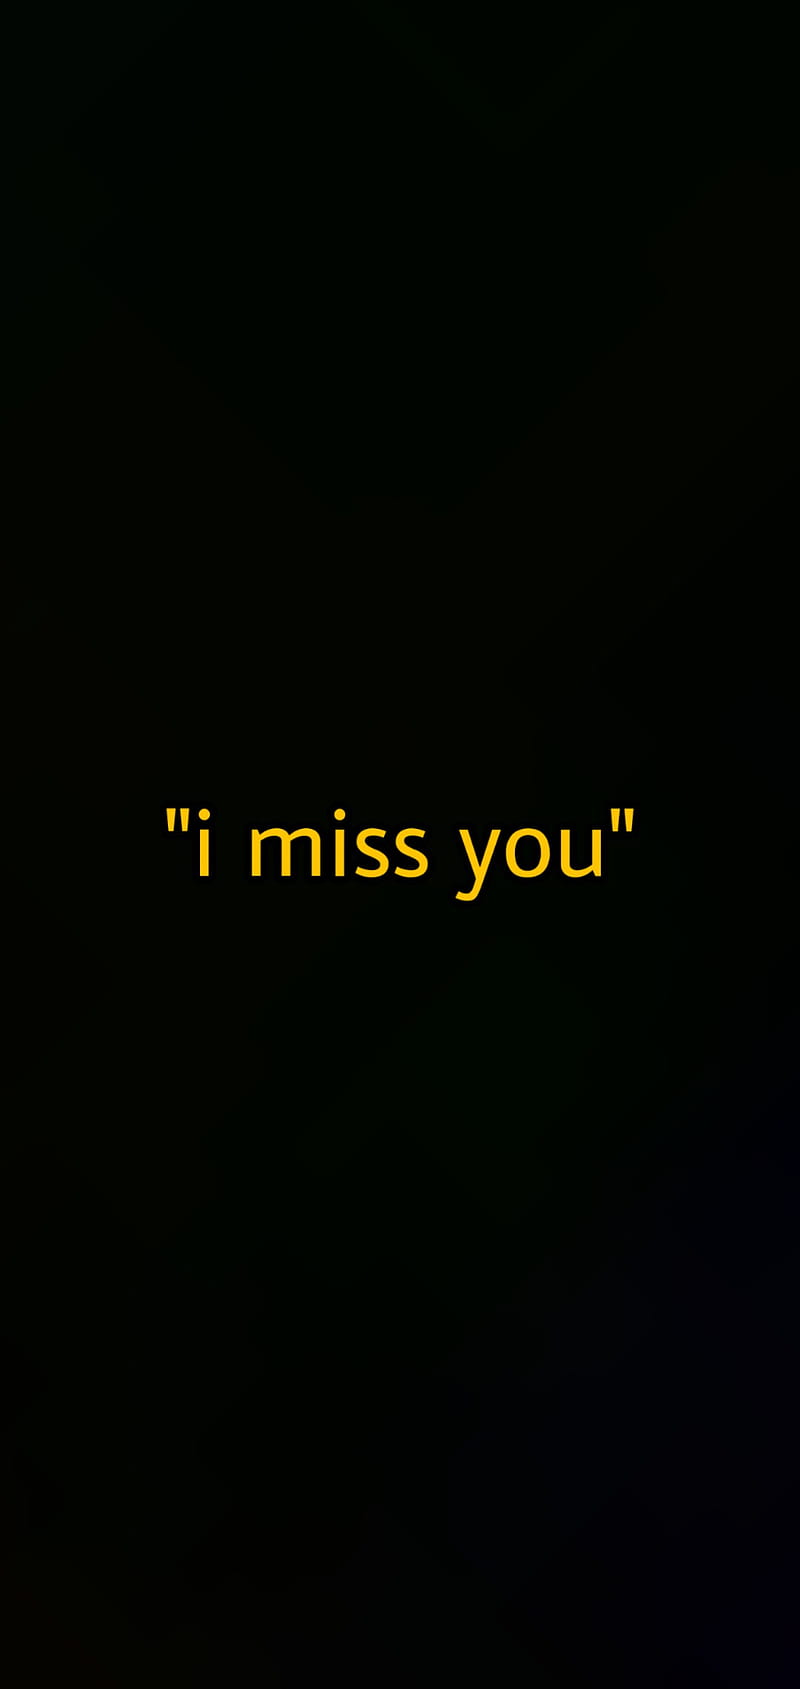 Miss you, fete, logo, love, me, mr, quotes, robot, sad, thinking ...